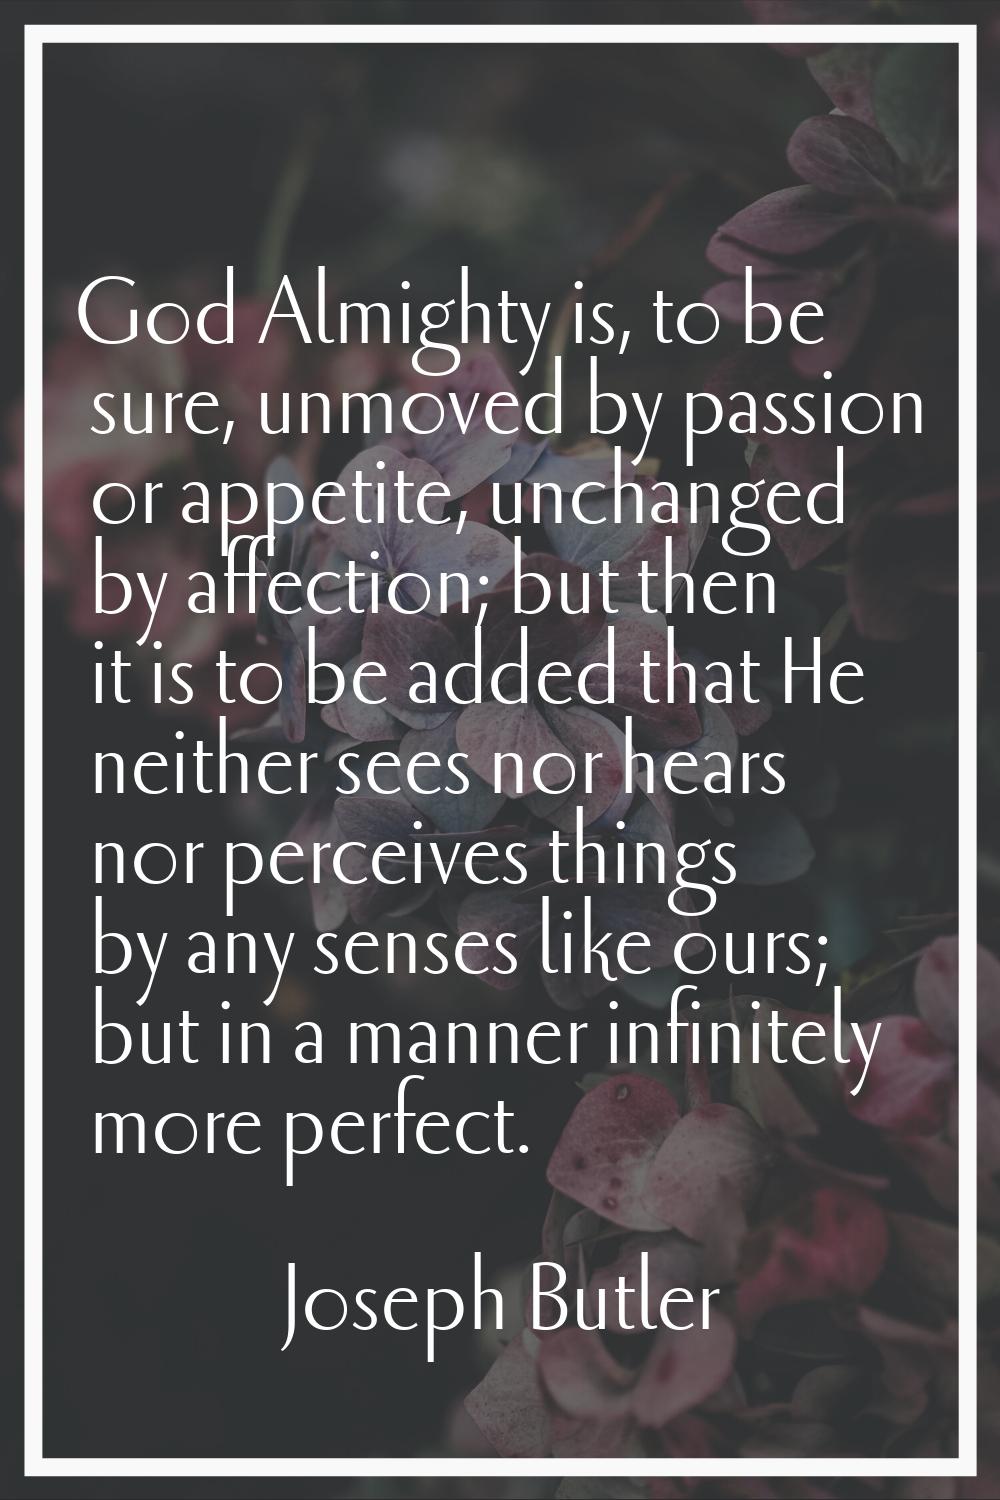 God Almighty is, to be sure, unmoved by passion or appetite, unchanged by affection; but then it is